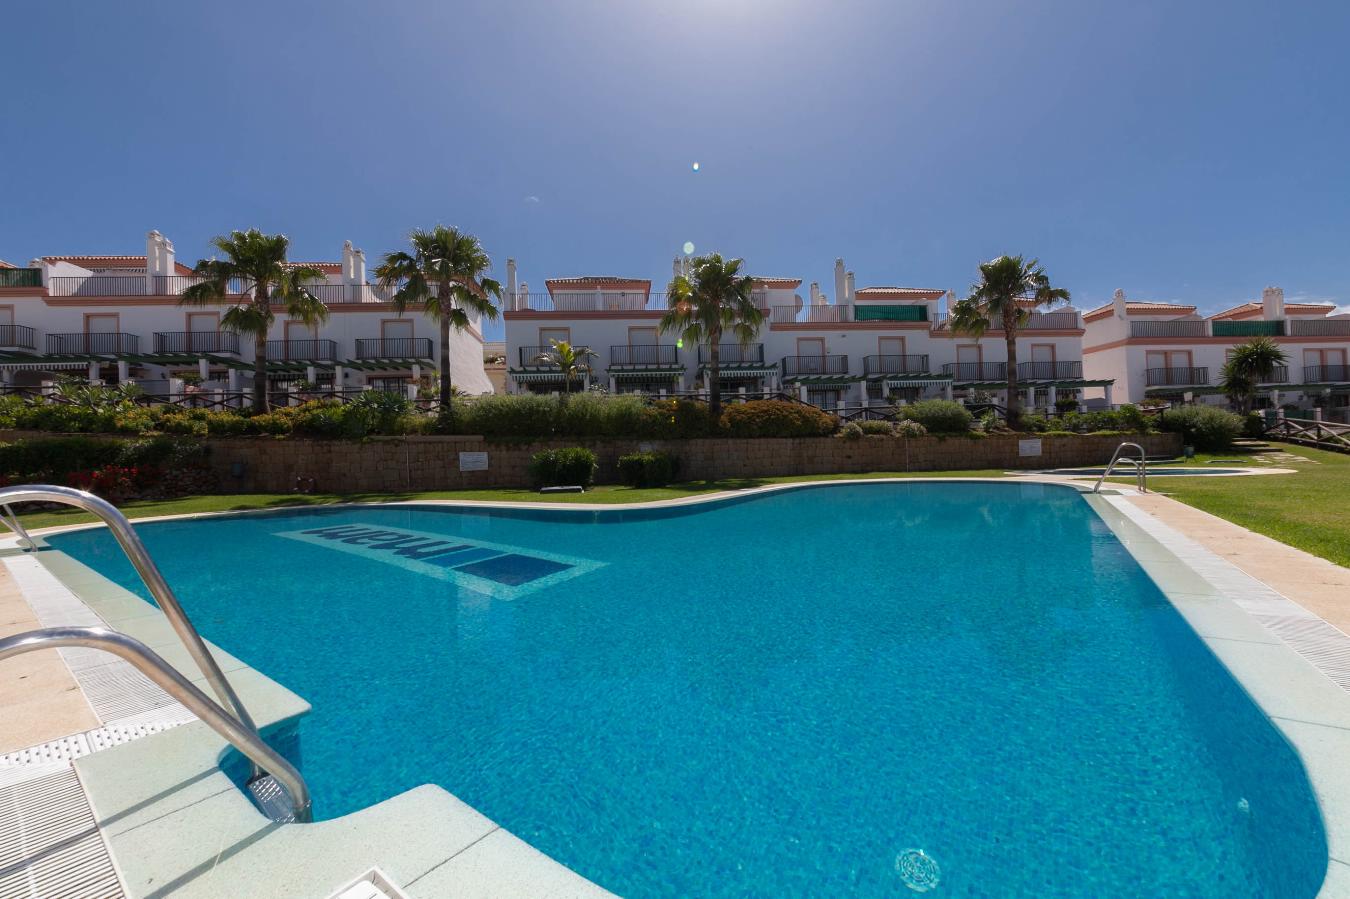 2 bedroom Townhouse at Cabopino, Marbella